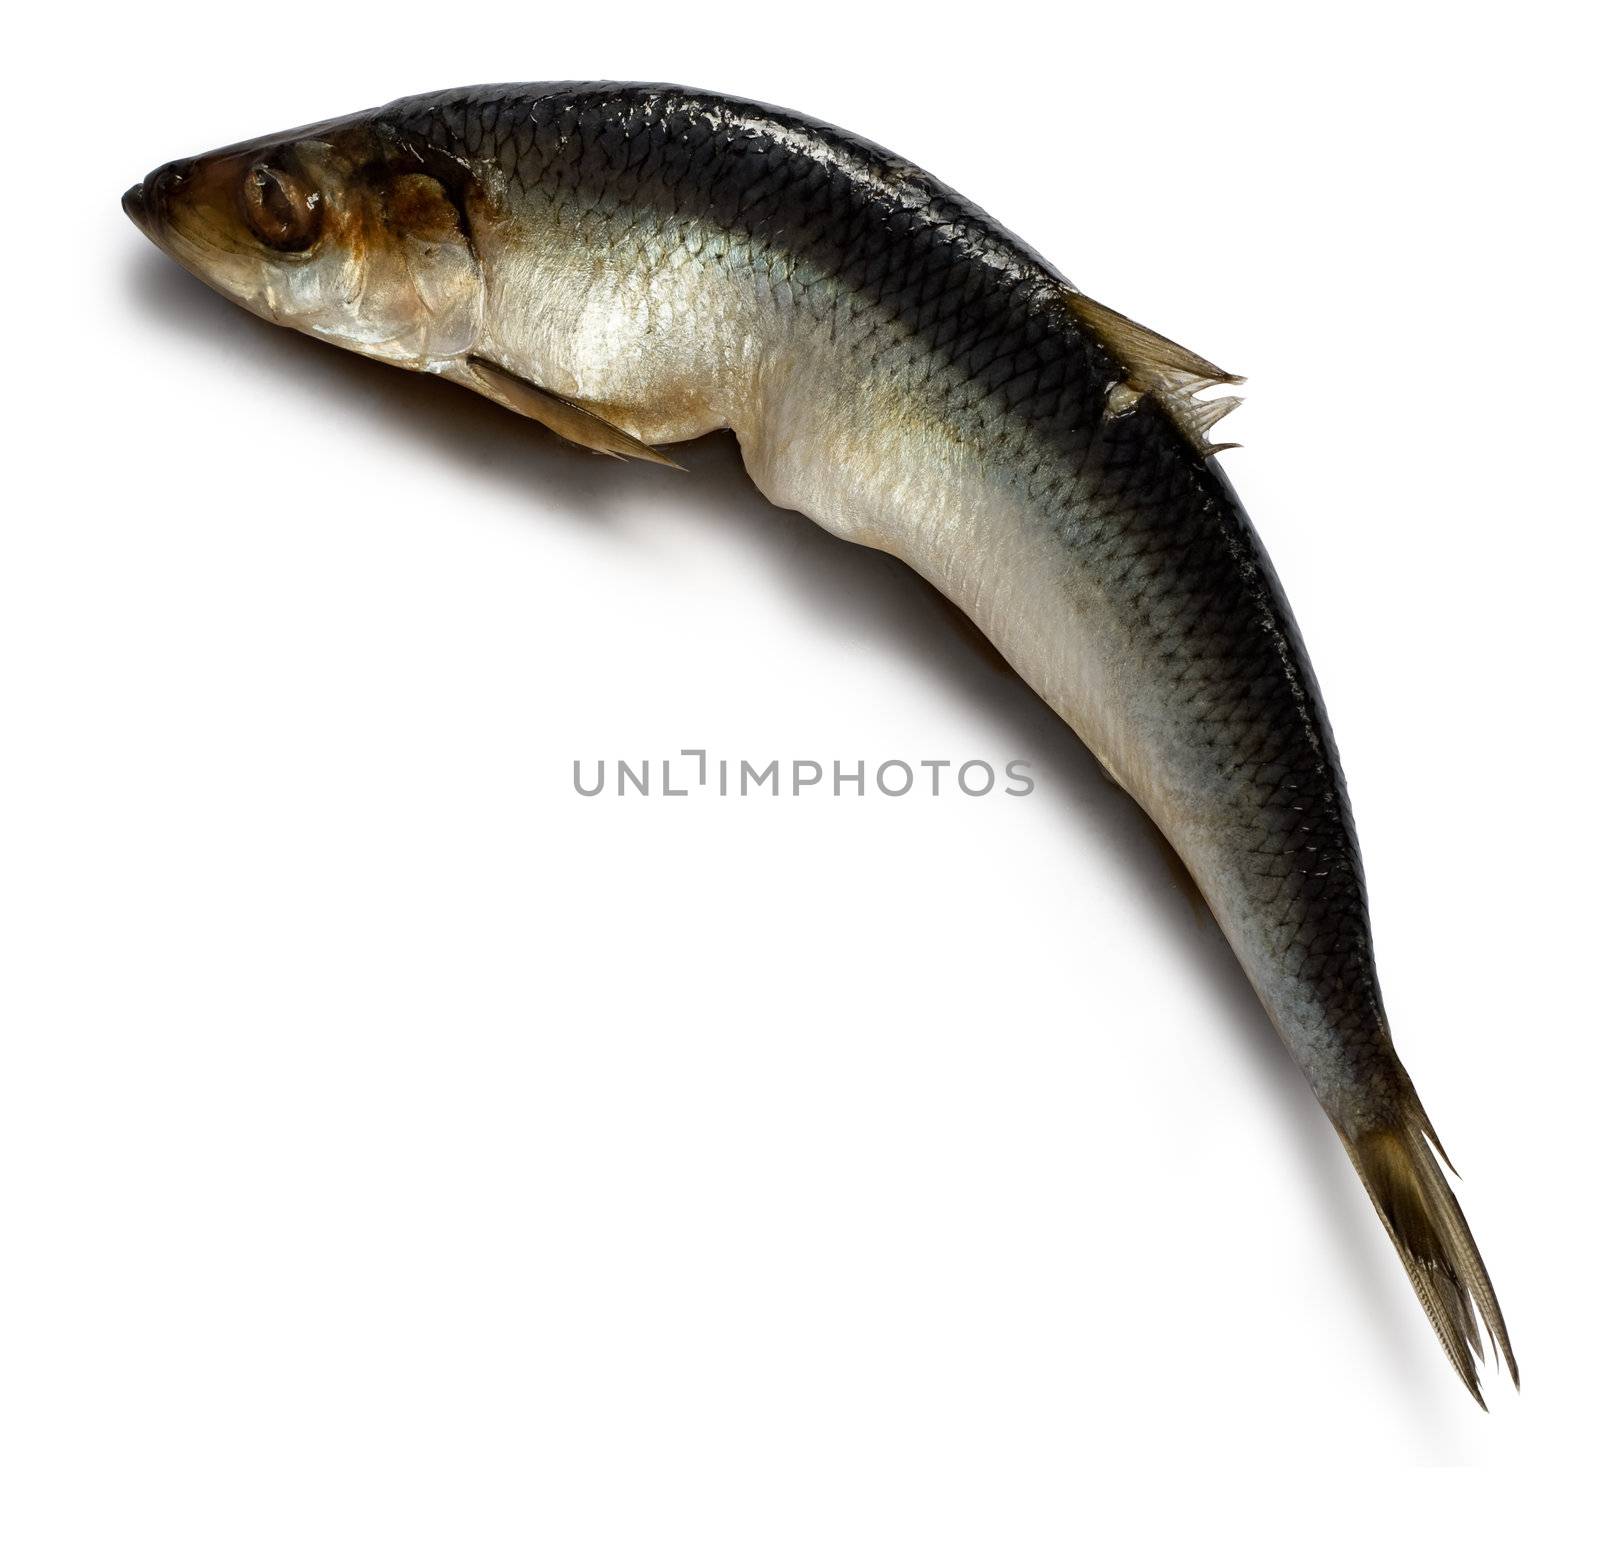 Salted herring on white background with shadow. Clipping path included.